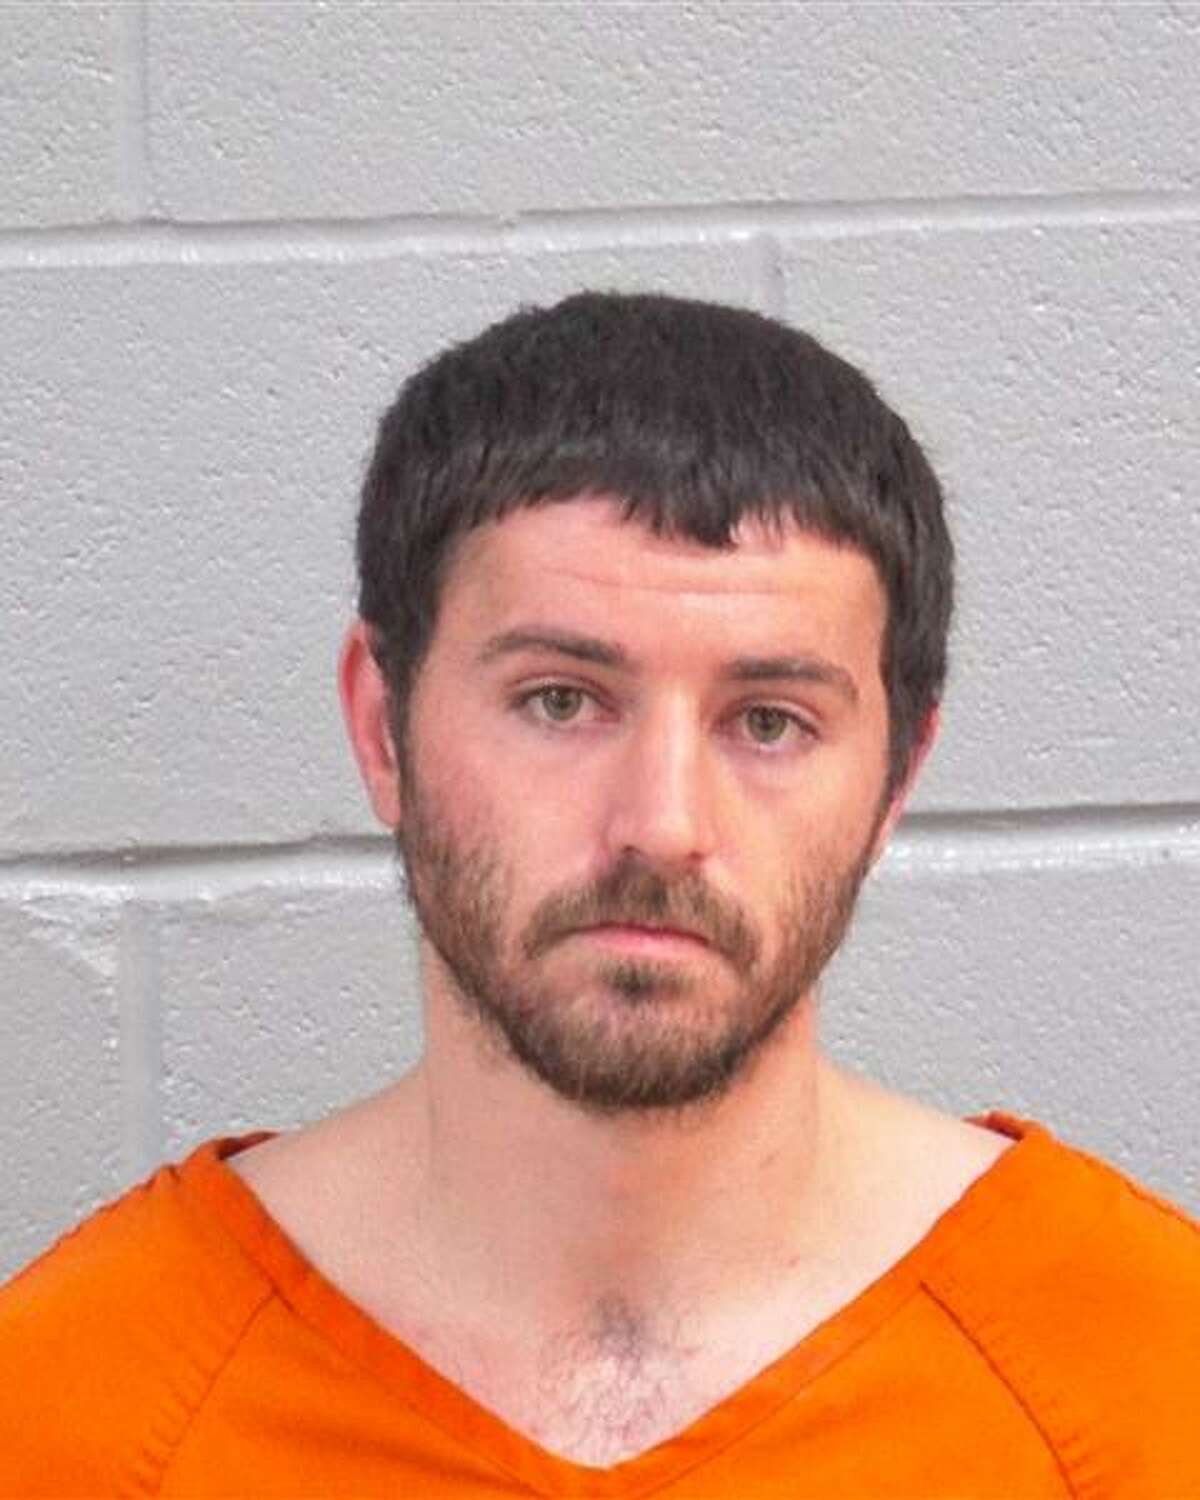  Zachery Tyler Oneal, 25, was arreted arrested for hindering apprehension.